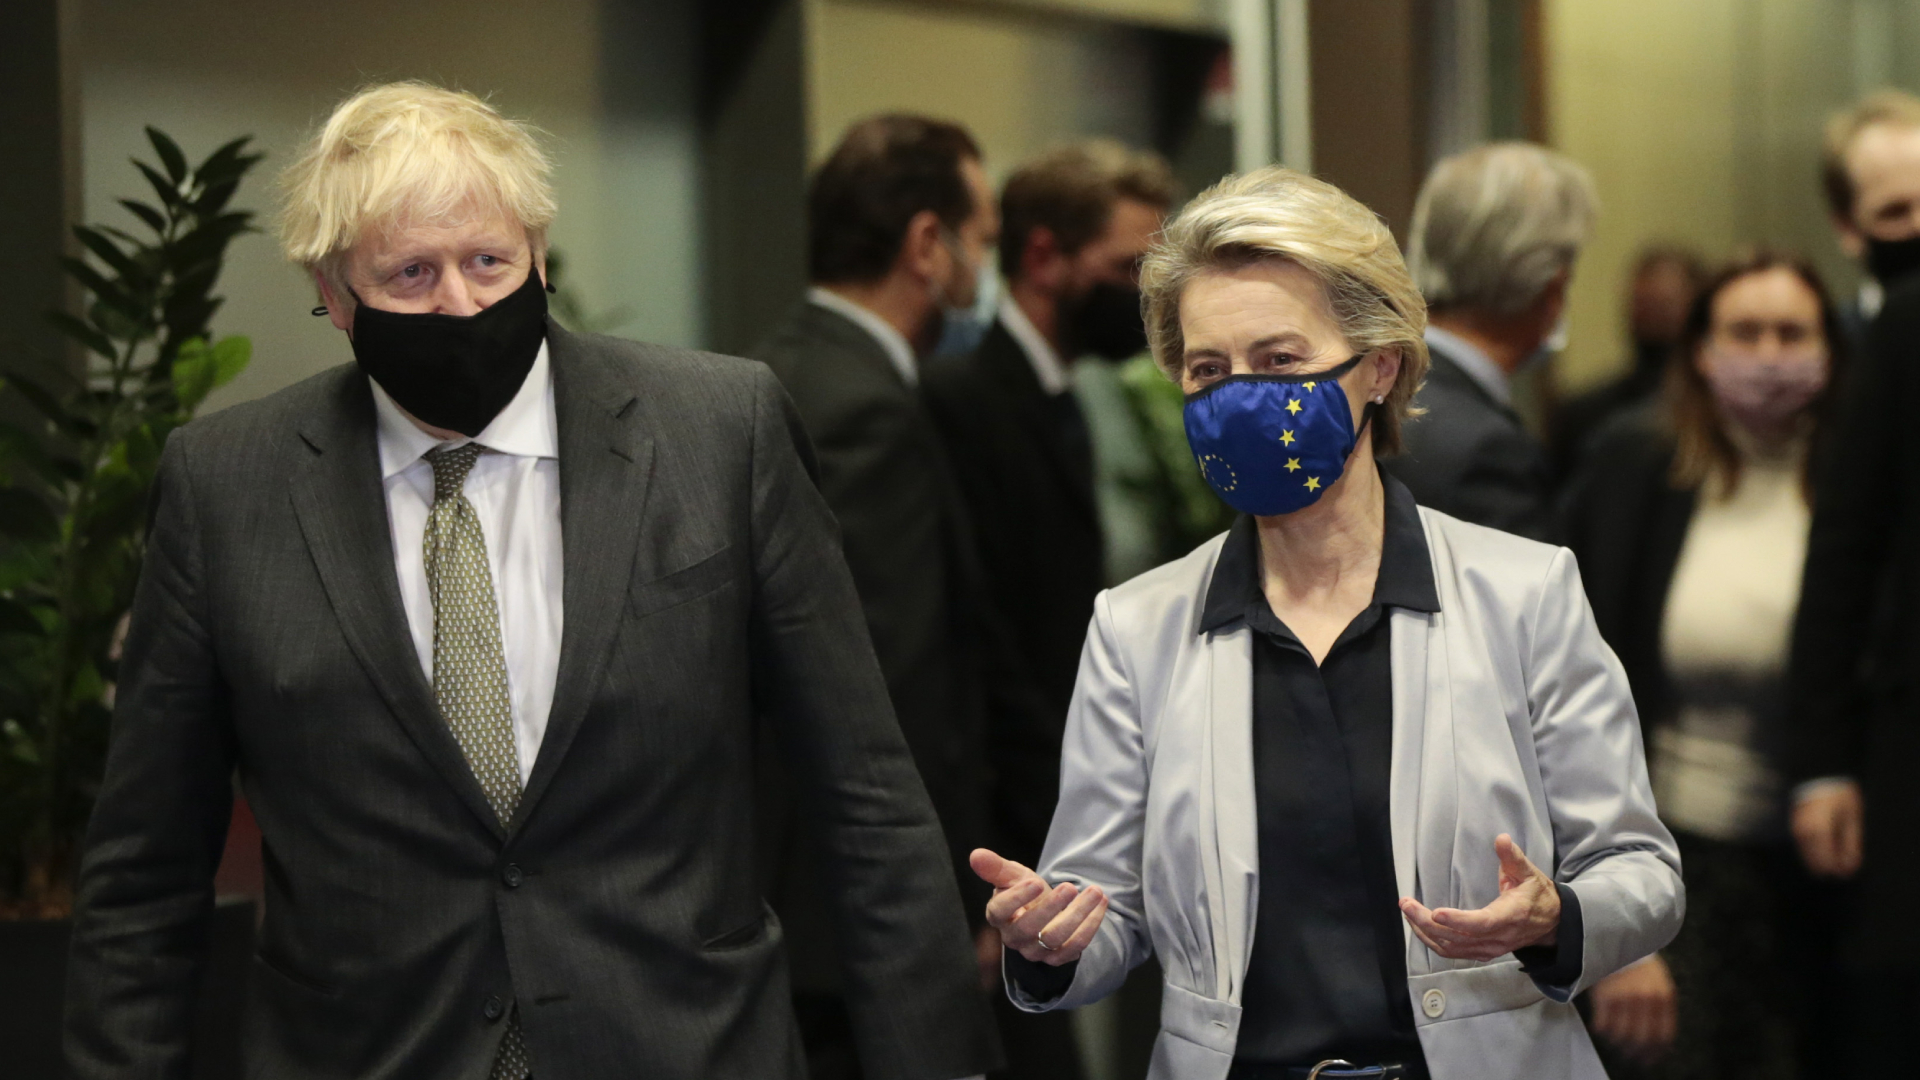 European Commission President Ursula von der Leyen, right, speaks with British Prime Minister Boris Johnson prior to a meeting at EU headquarters in Brussels, Wednesday, Dec. 9, 2020. (Olivier Hoslet, Pool via AP)